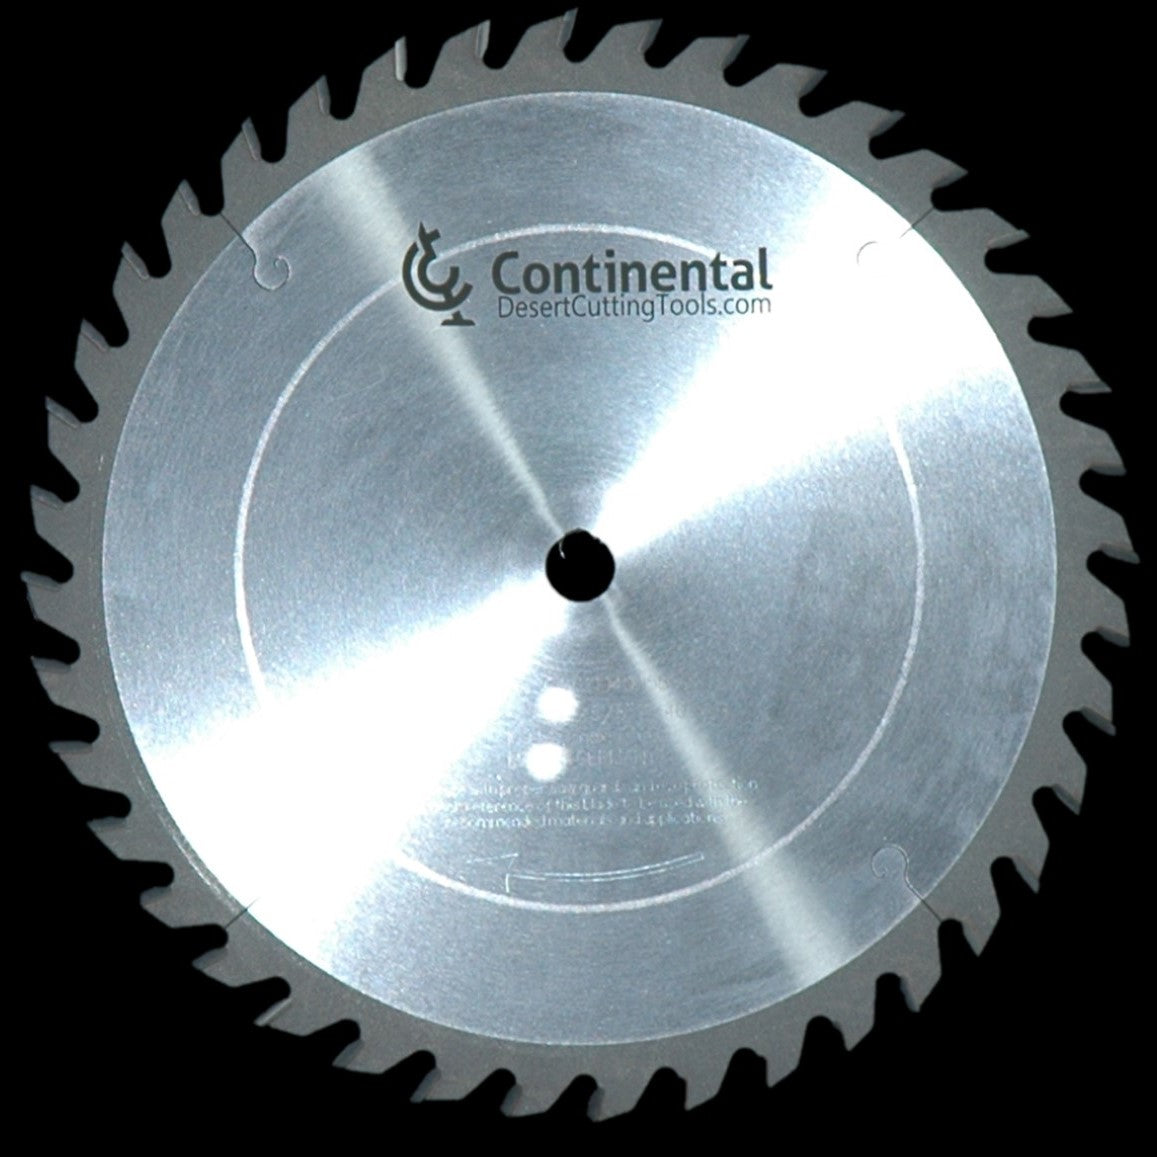 C-1040A Continental Saw Blade 10"x40 tooth 5/8" bore Alternate Top Bevel